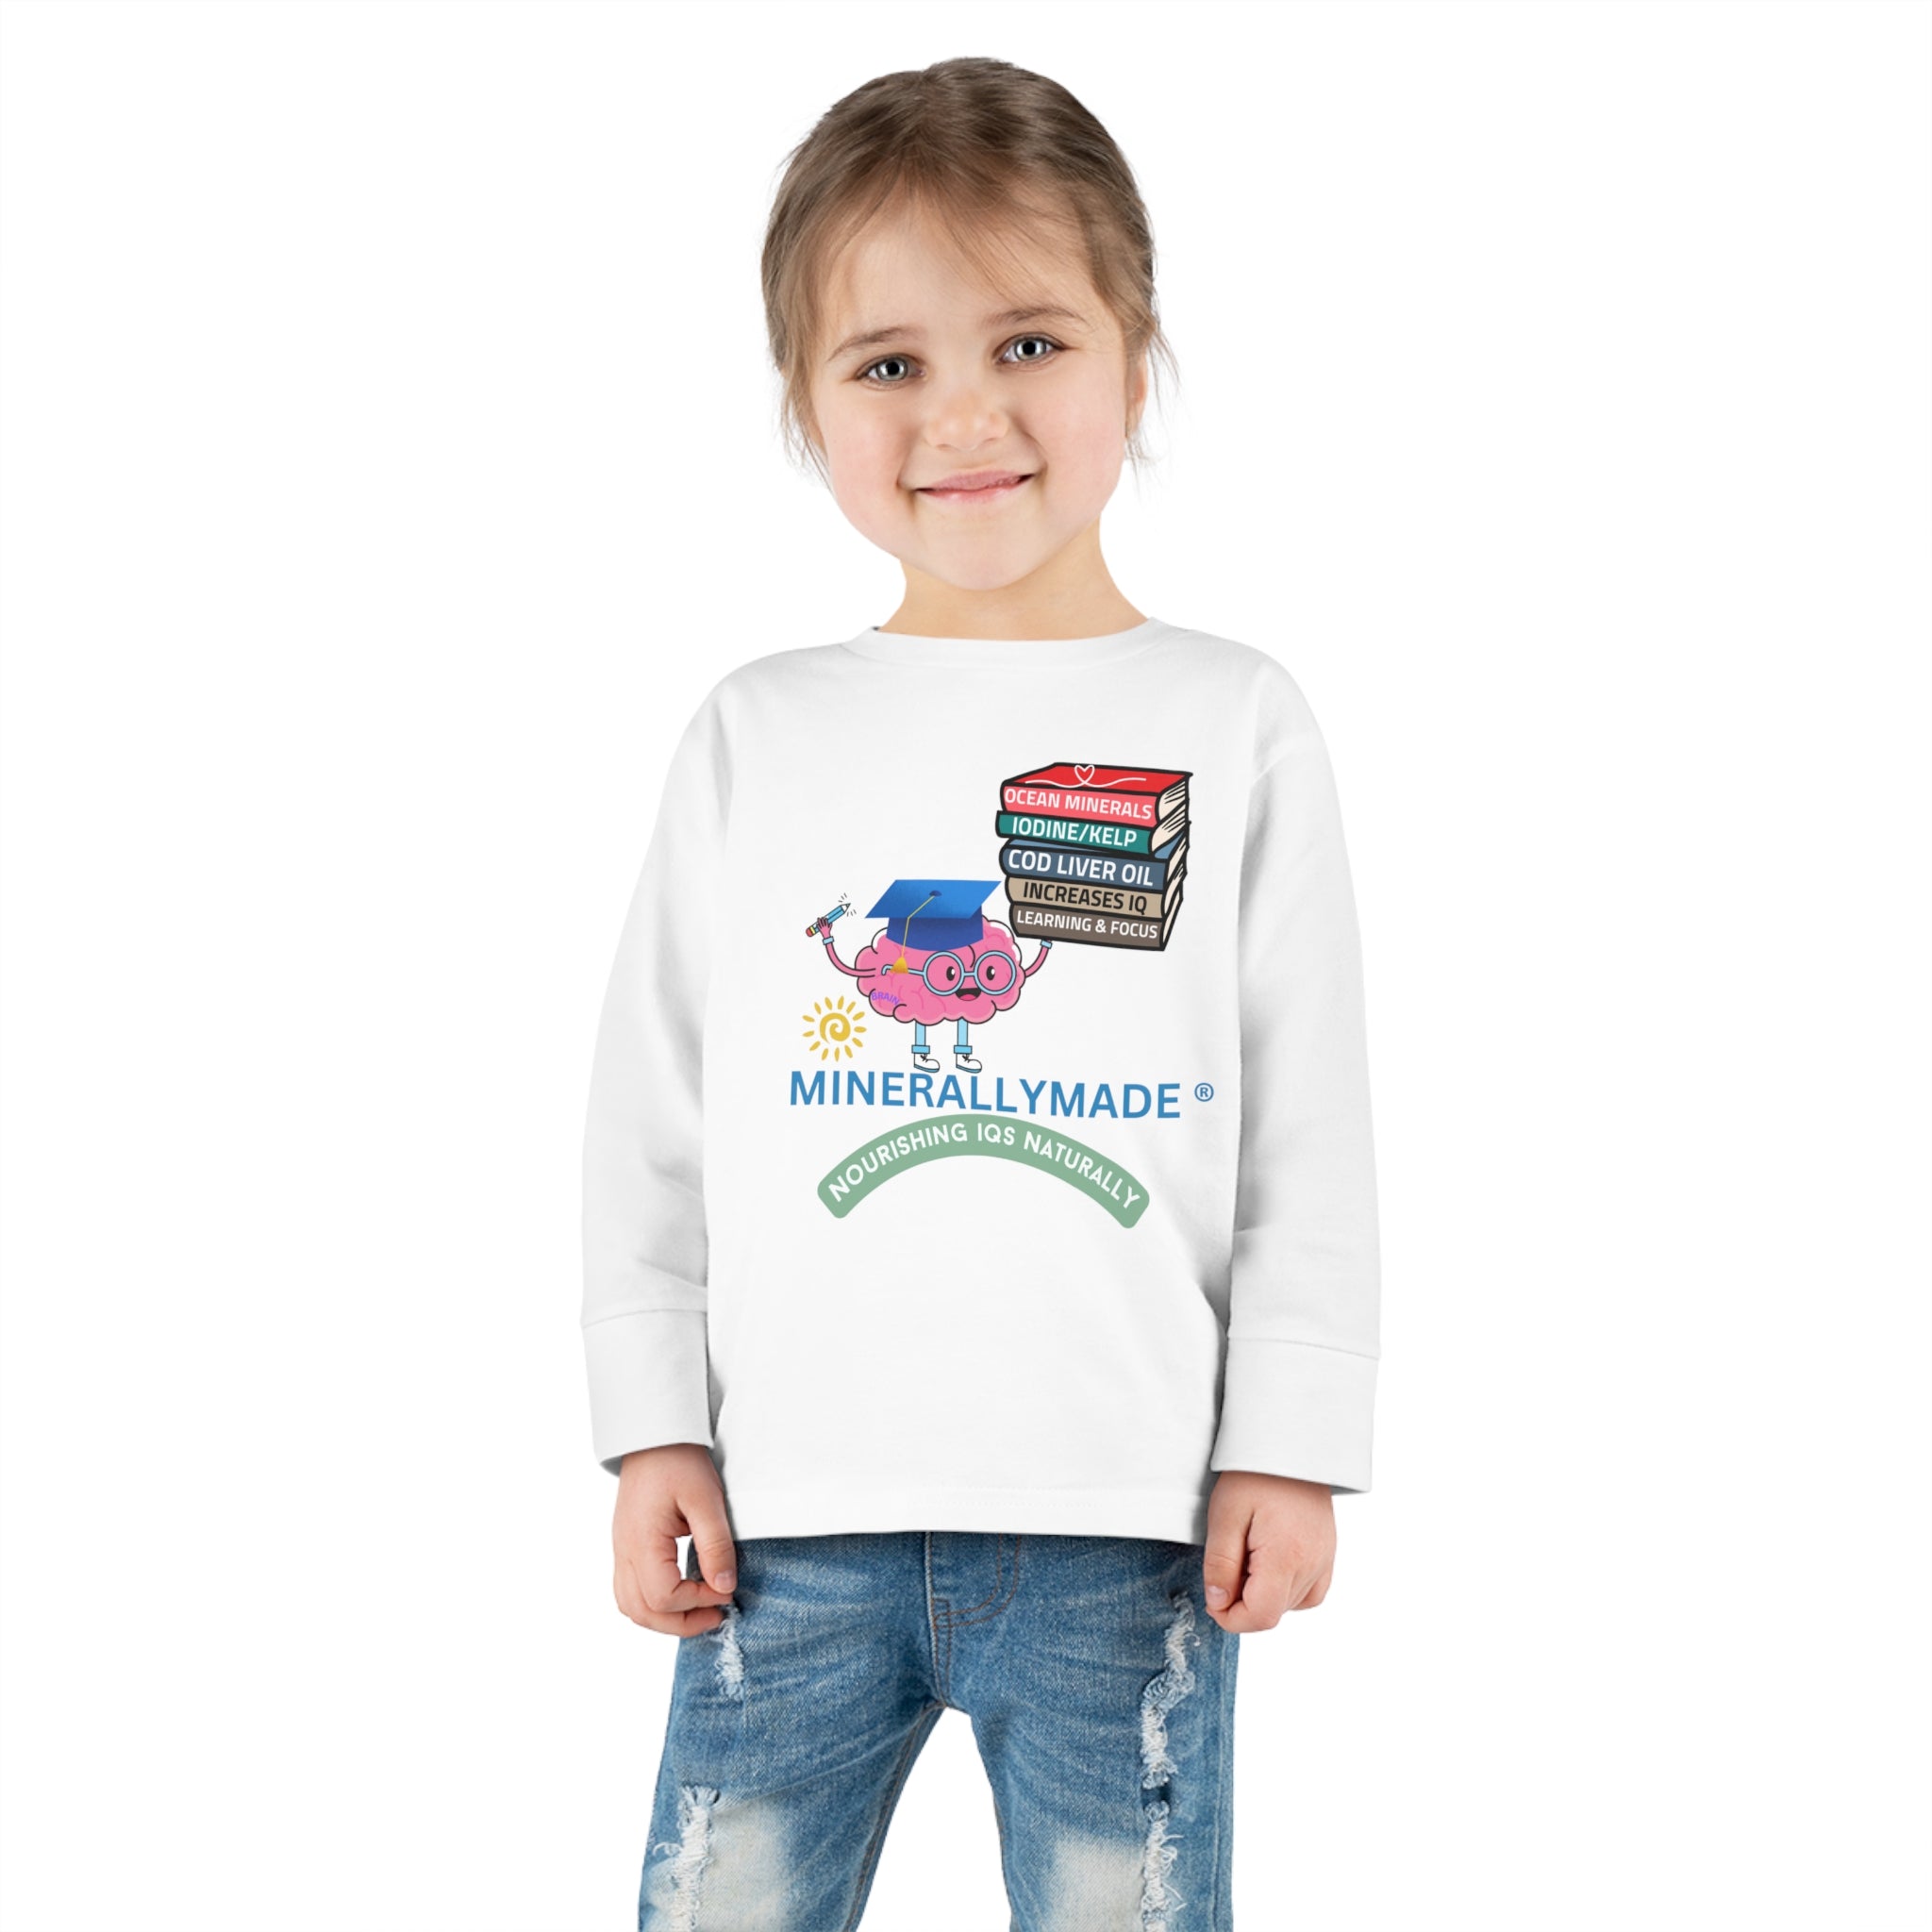 Minerallymade | Nourishing IQs Naturally | Toddler Long Sleeve Tee